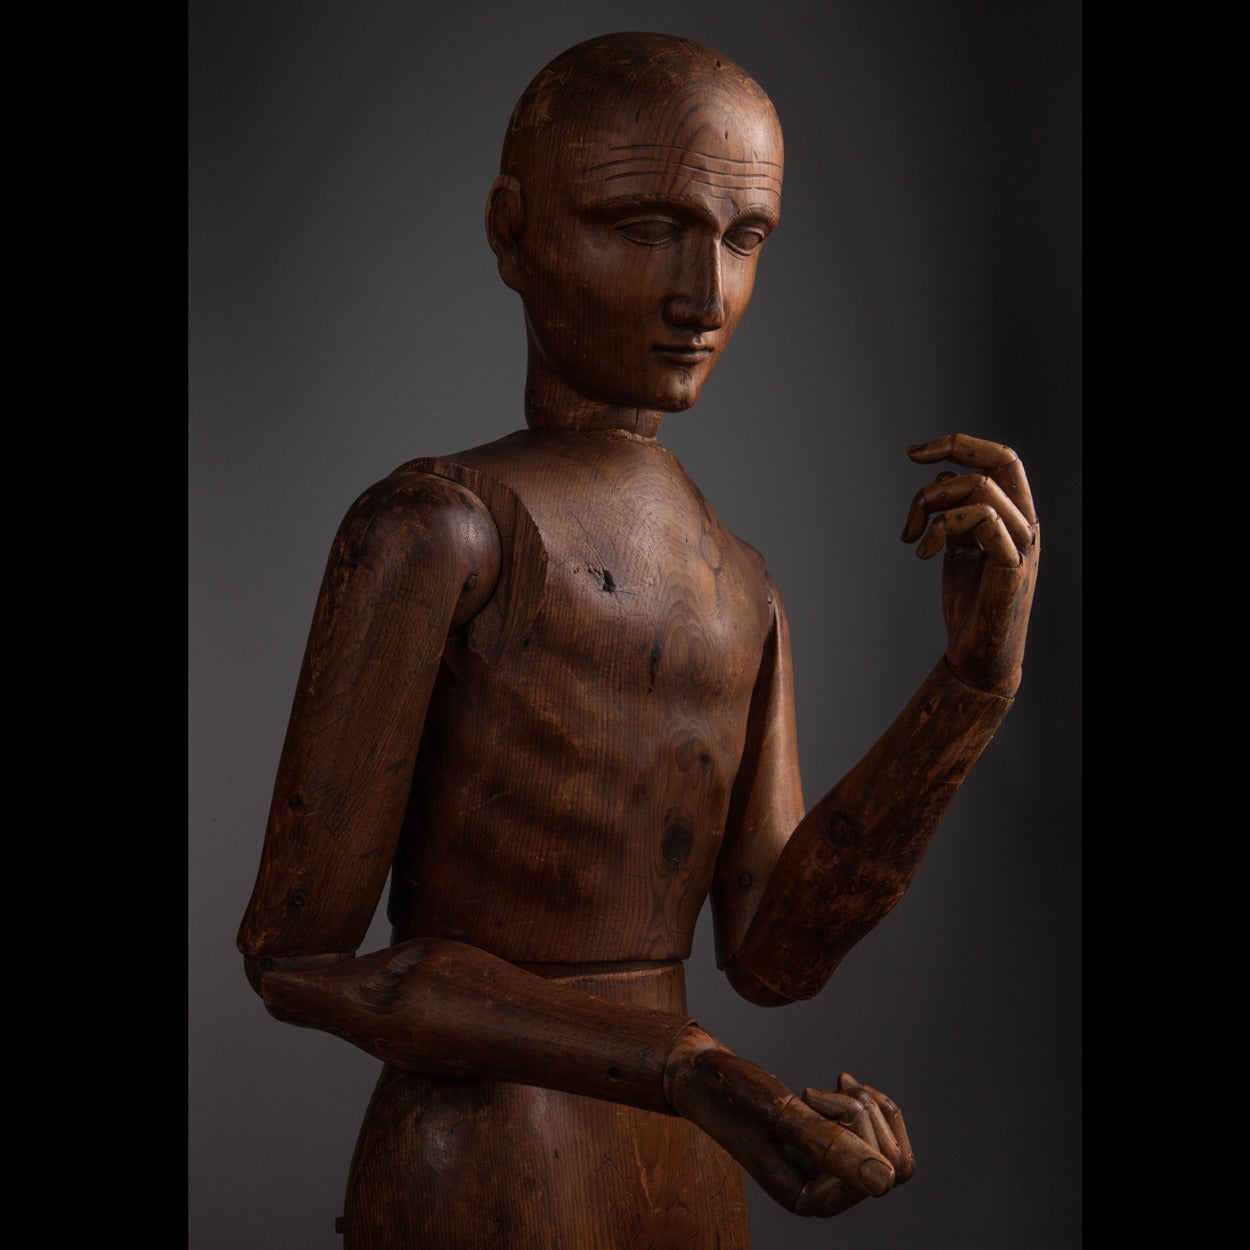 Rare artist model, with articulated fingers and detailed features.

Made of pine circa 1880.